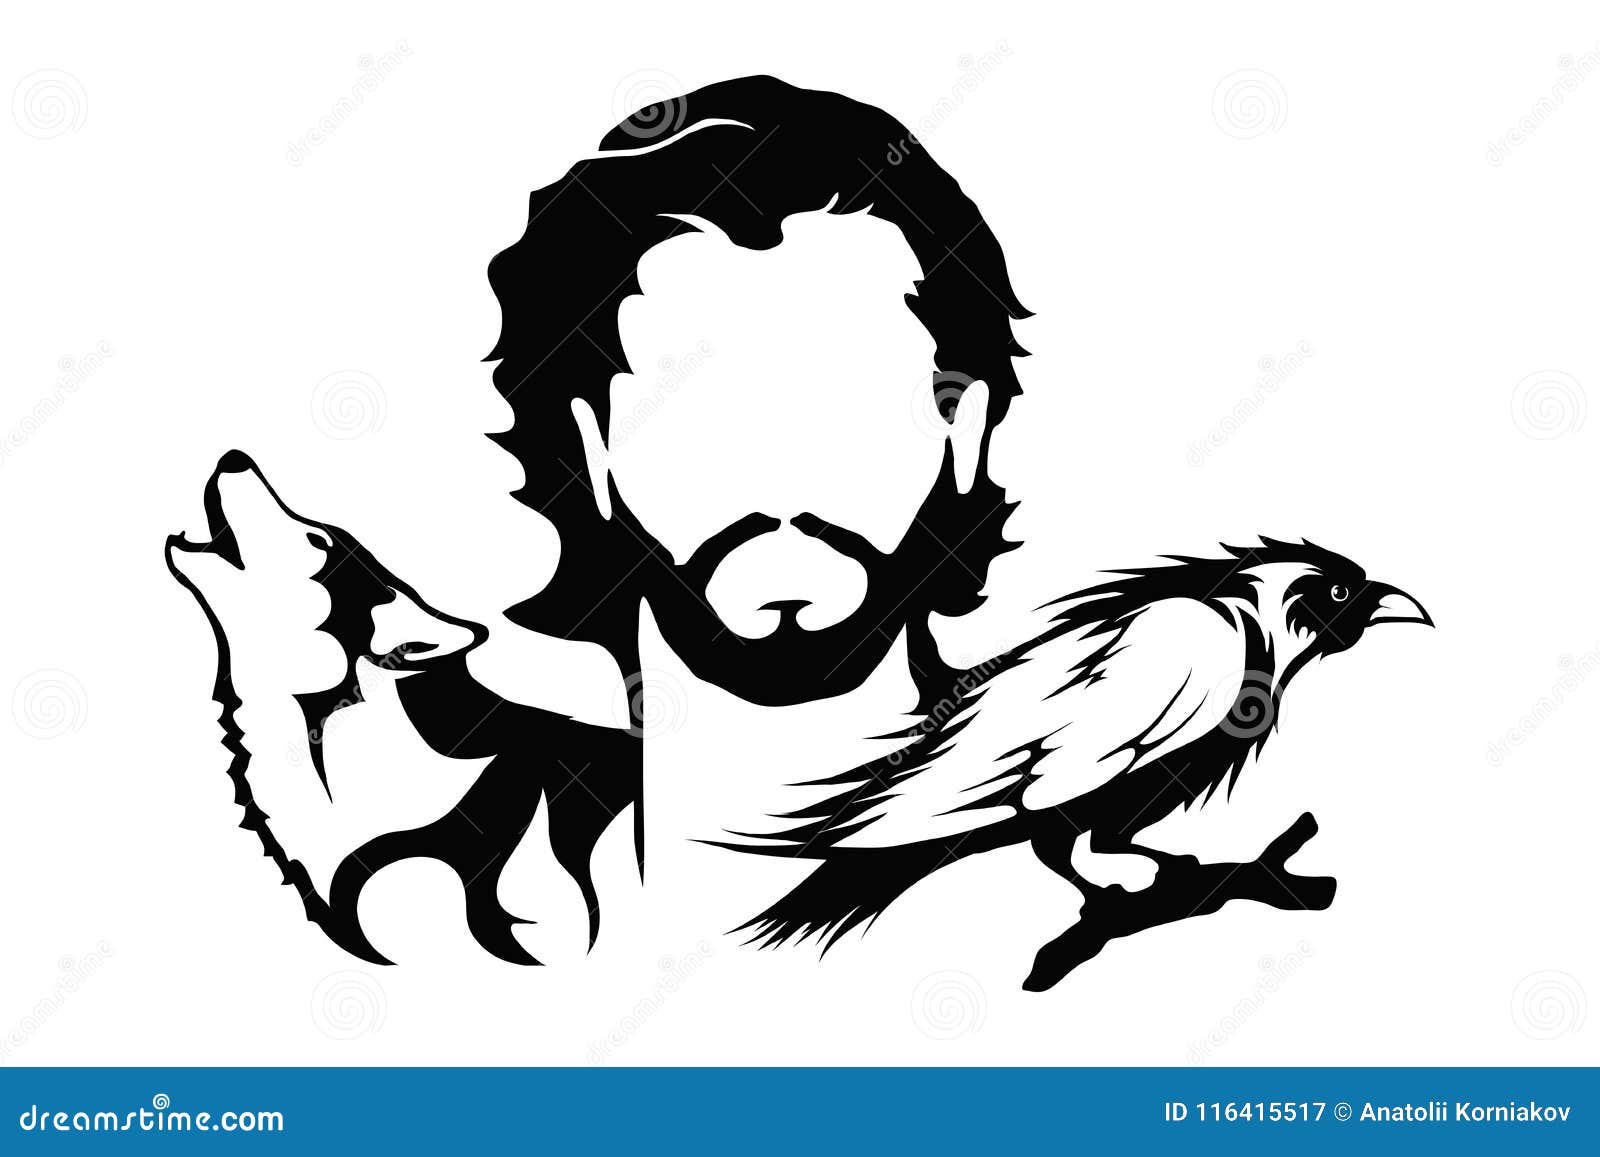 jon snow with a wolf and raven . game of thrones.